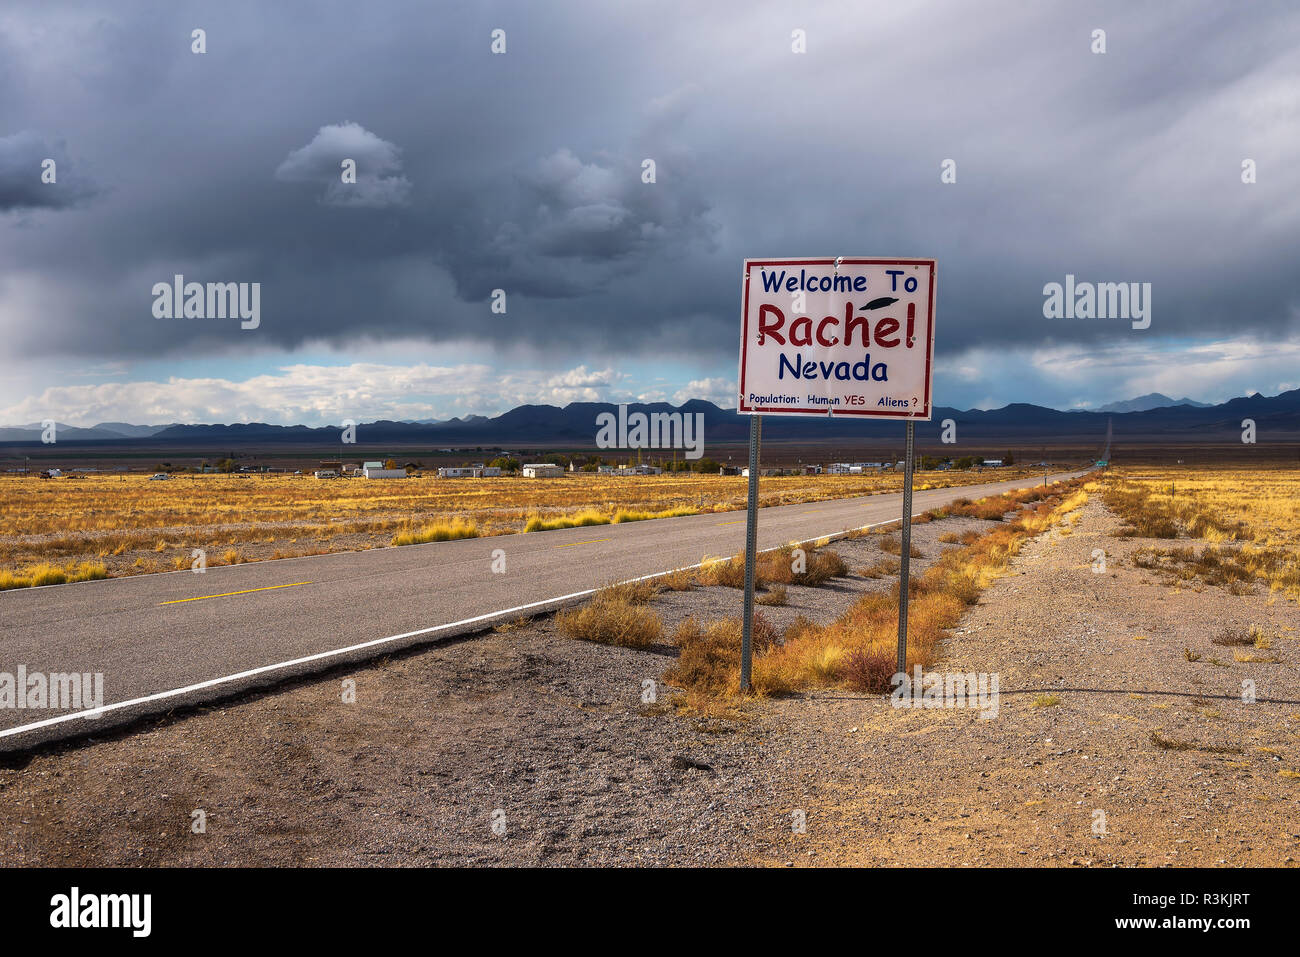 Welcome to Rachel street sign on SR-375 in Nevada, USA Stock Photo